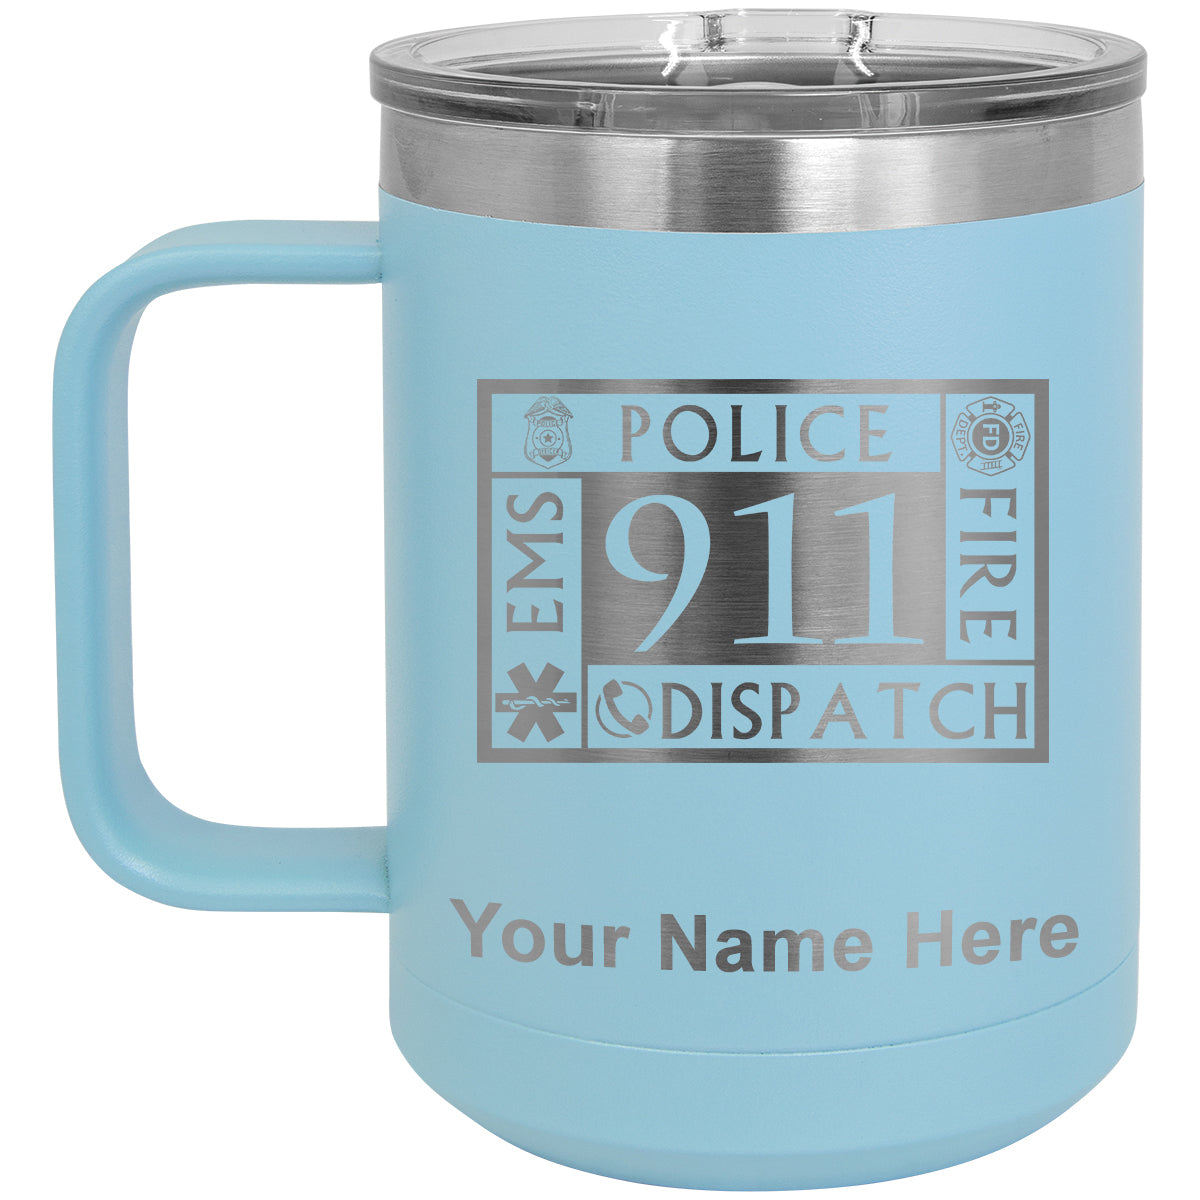 15oz Vacuum Insulated Coffee Mug, Emergency Dispatcher 911, Personalized Engraving Included